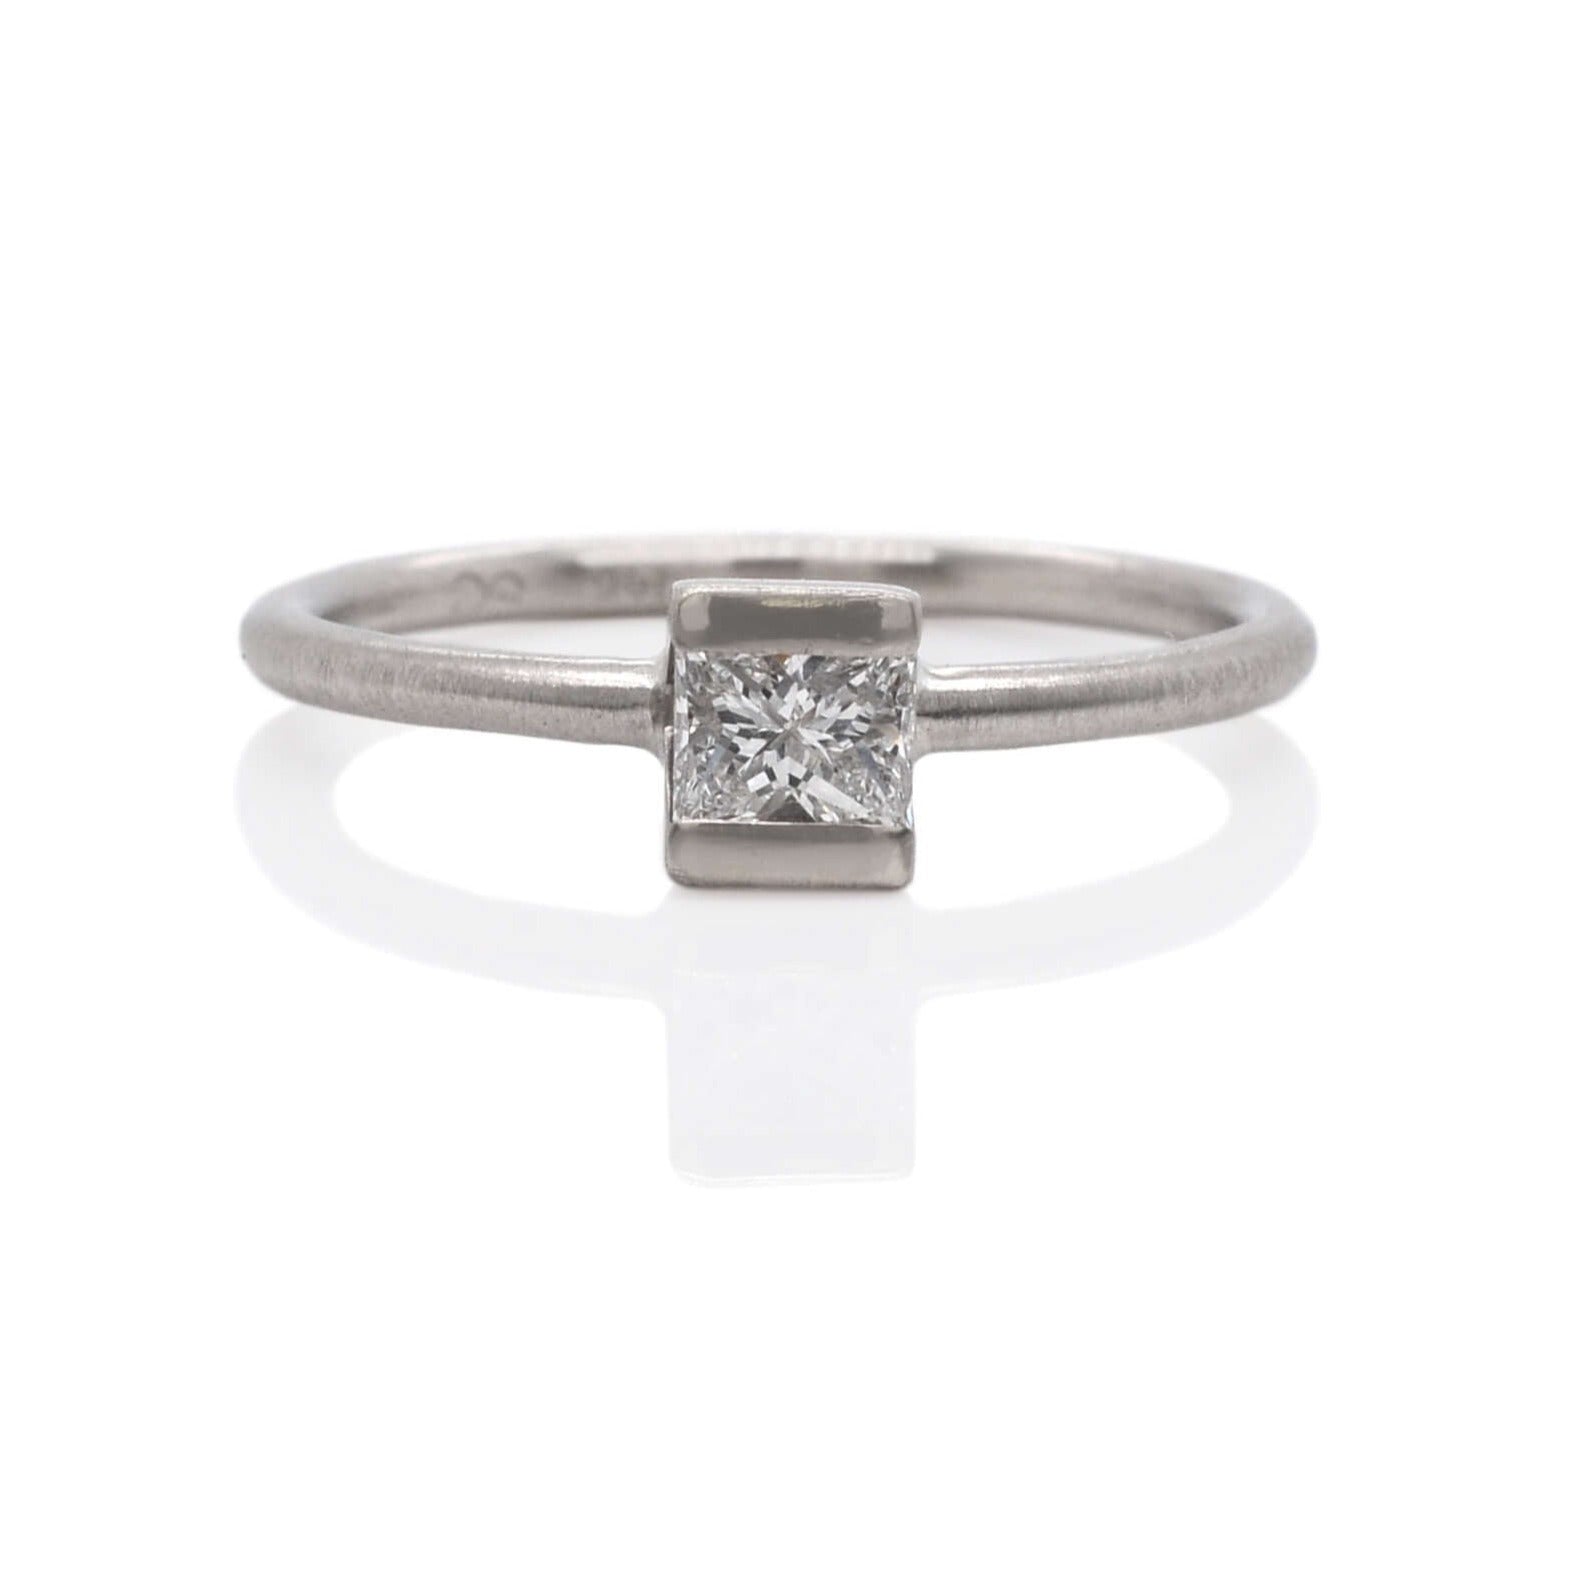 Princess cut diamond engagement ring in white gold. Handmade by EC Design Jewelry in Minneapolis, MN using recycled metal and conflict-free stone.